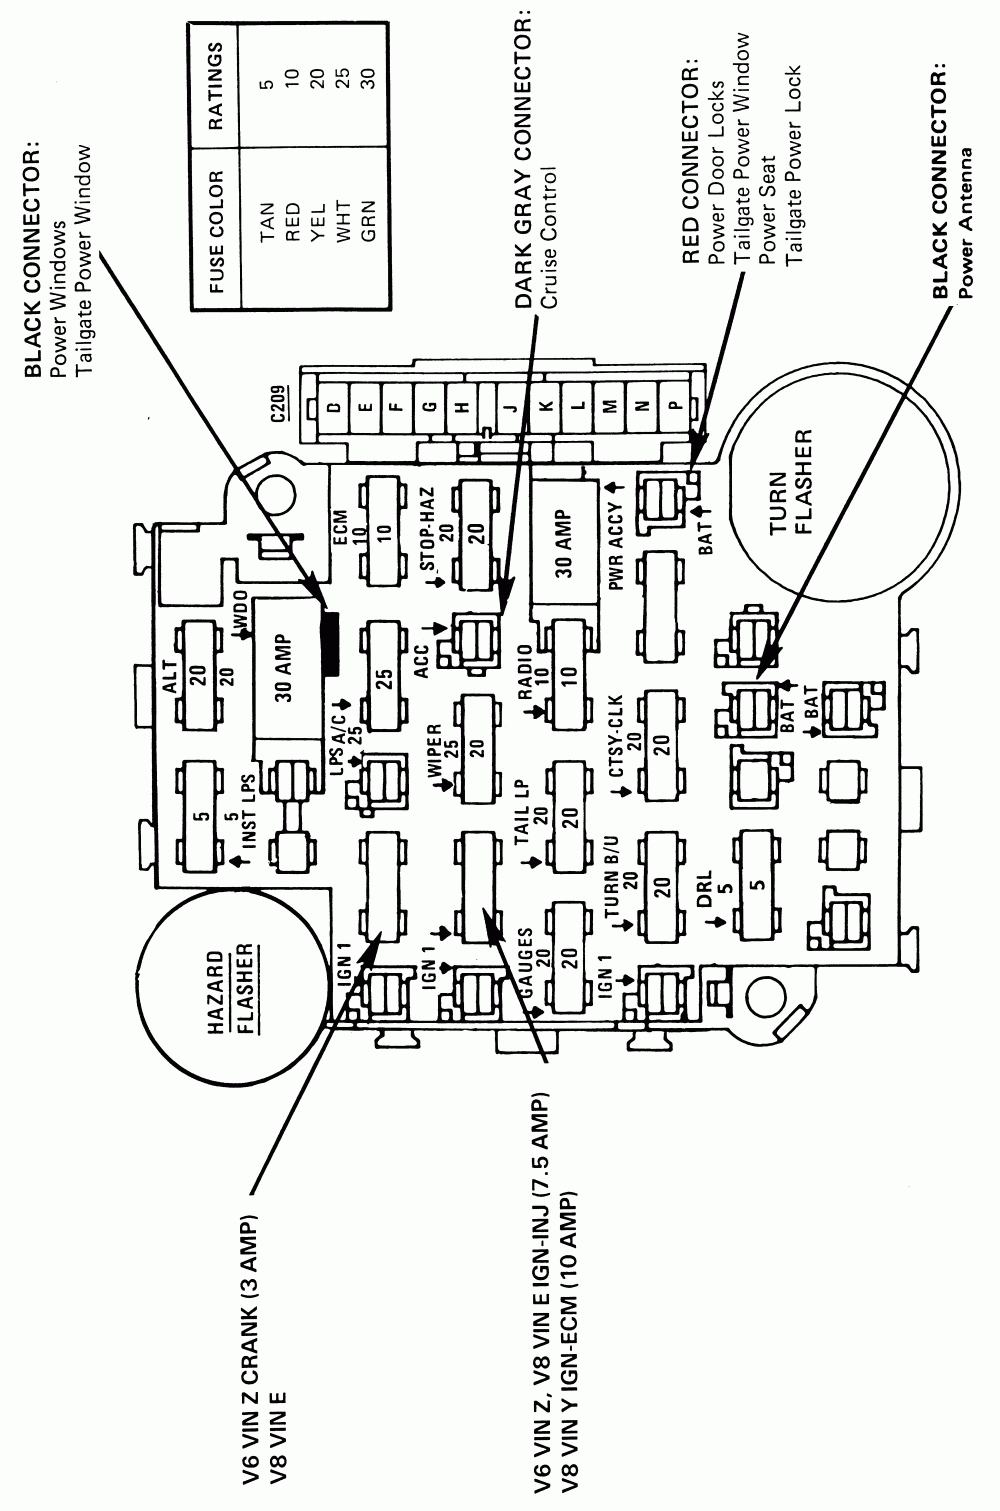 79 Chevy Fuse Box - Wiring Diagrams Hubs - 1979 Chevy Truck Wiring Diagram